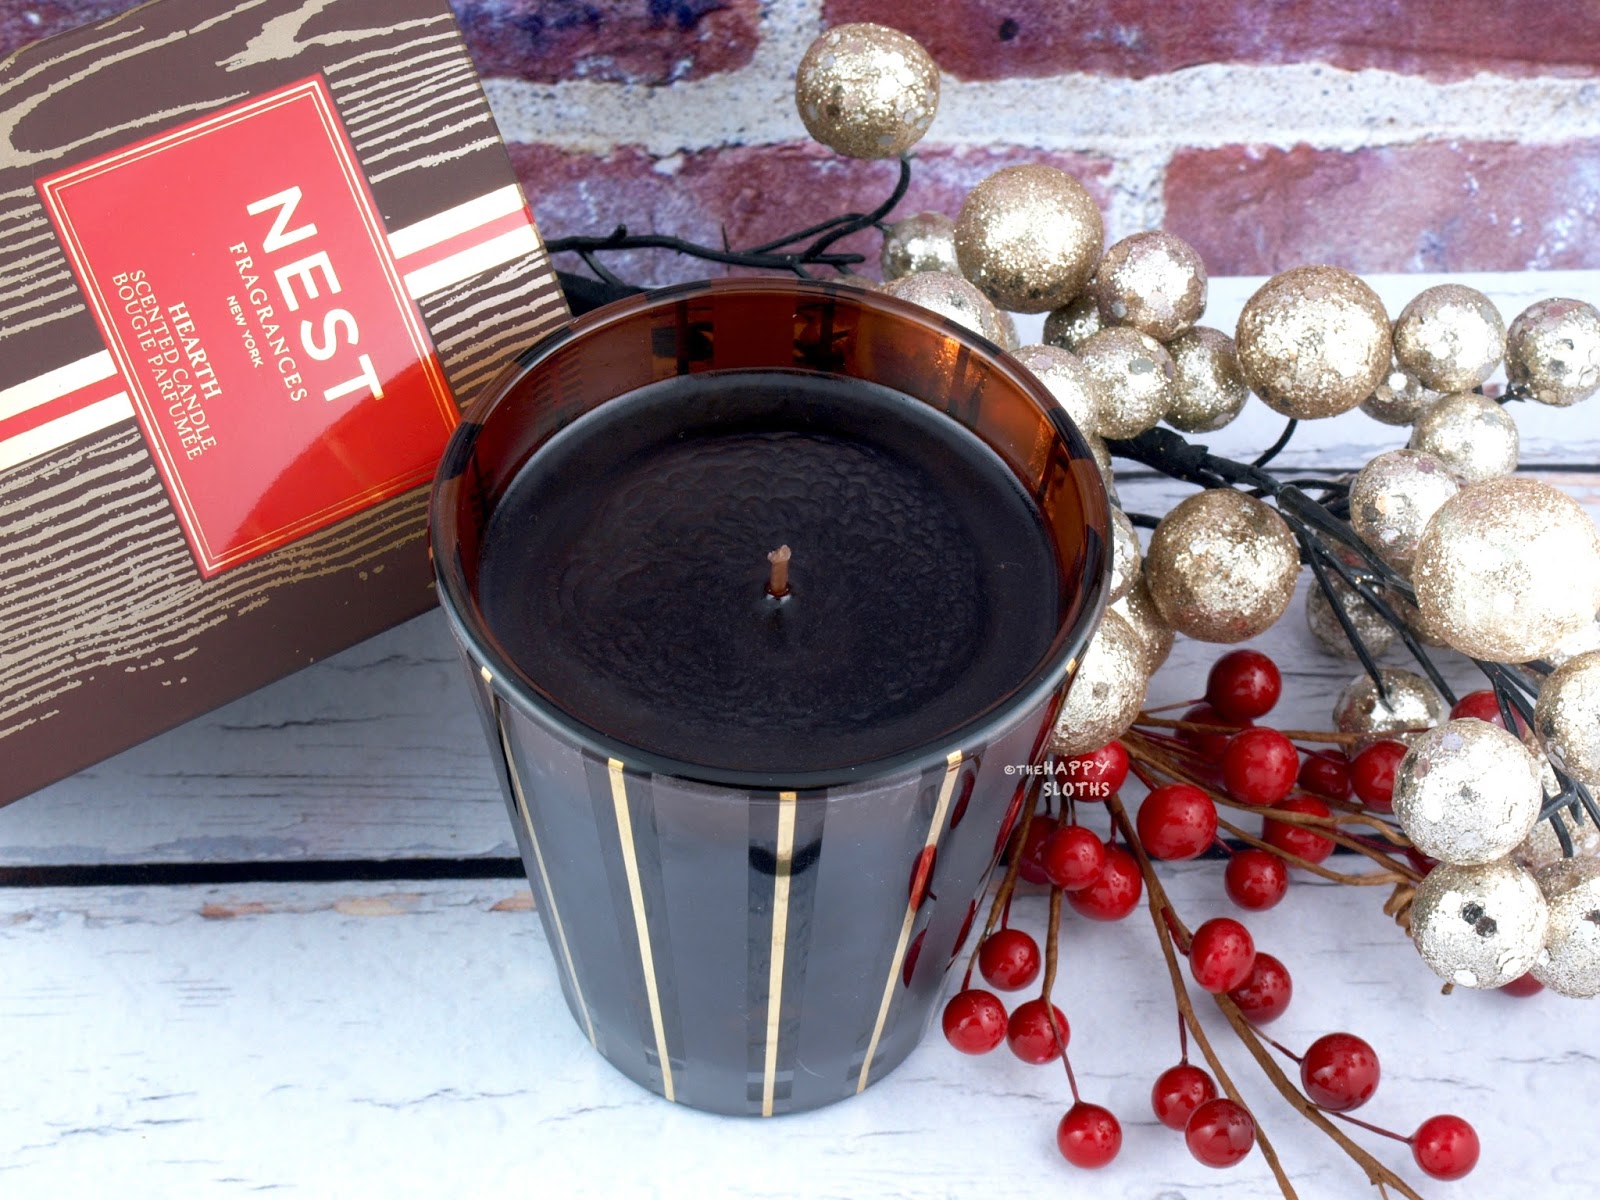 NEST Fragrances Hearth Candle: Review